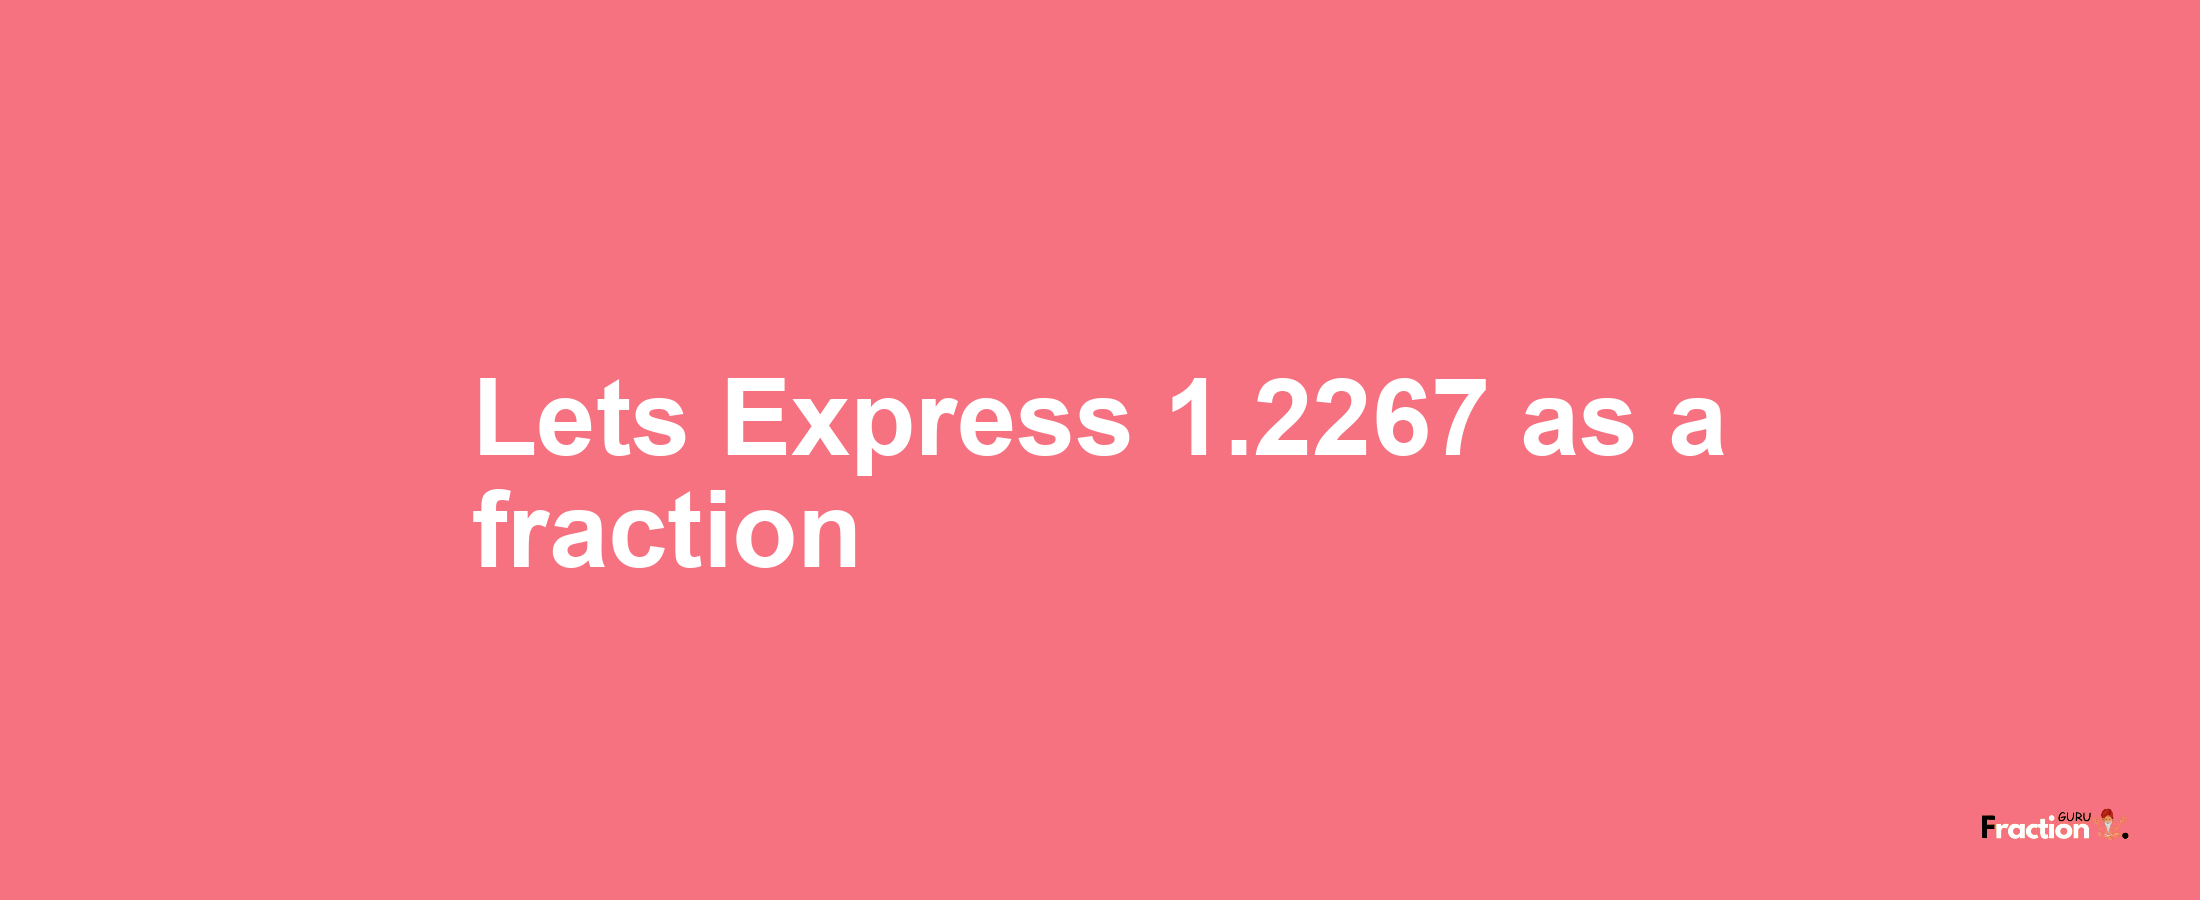 Lets Express 1.2267 as afraction